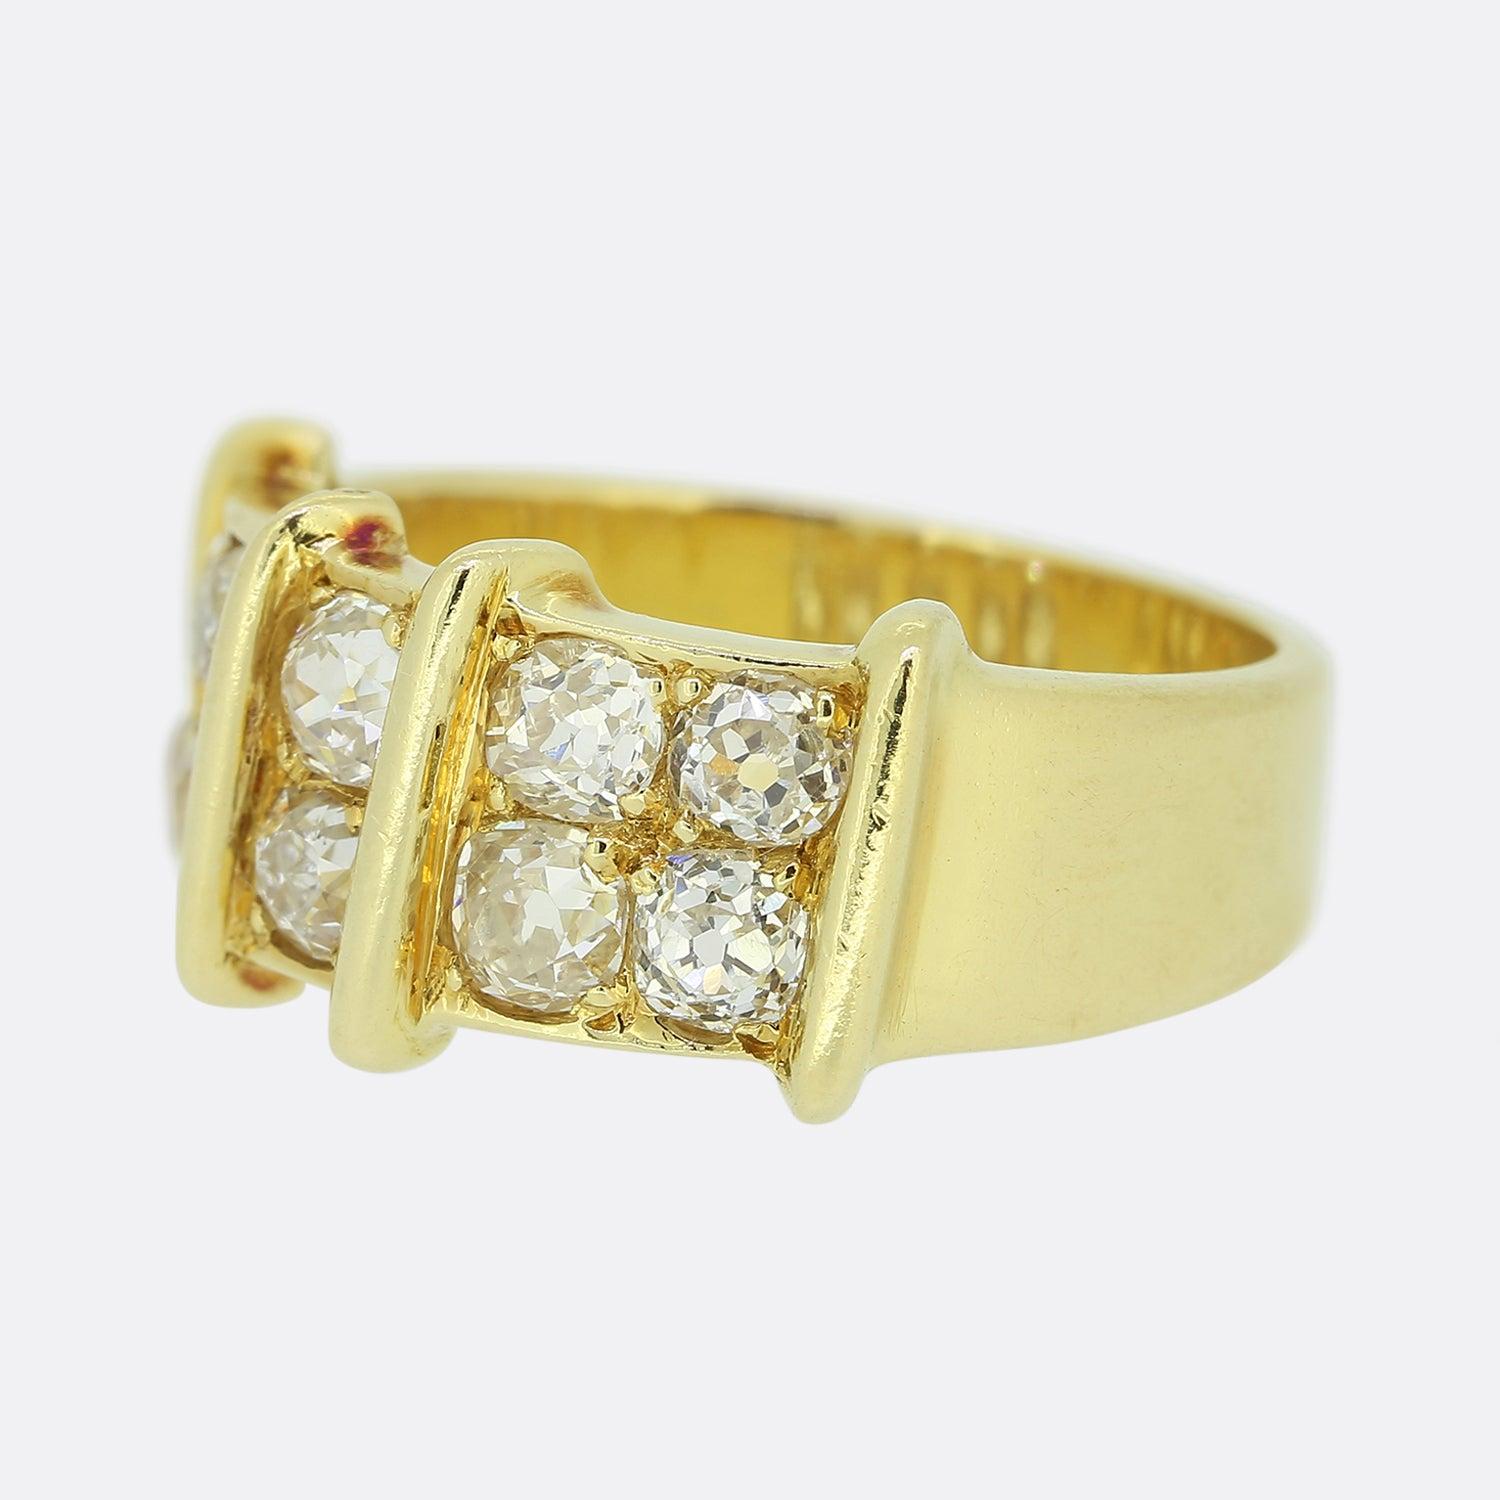 Here we have an excellently crafted 14ct yellow gold diamond ring. The face of this piece has been split into three defined sections across two rows with a duo of old cut diamonds at the centre and four matching stones at either side. 

Condition: